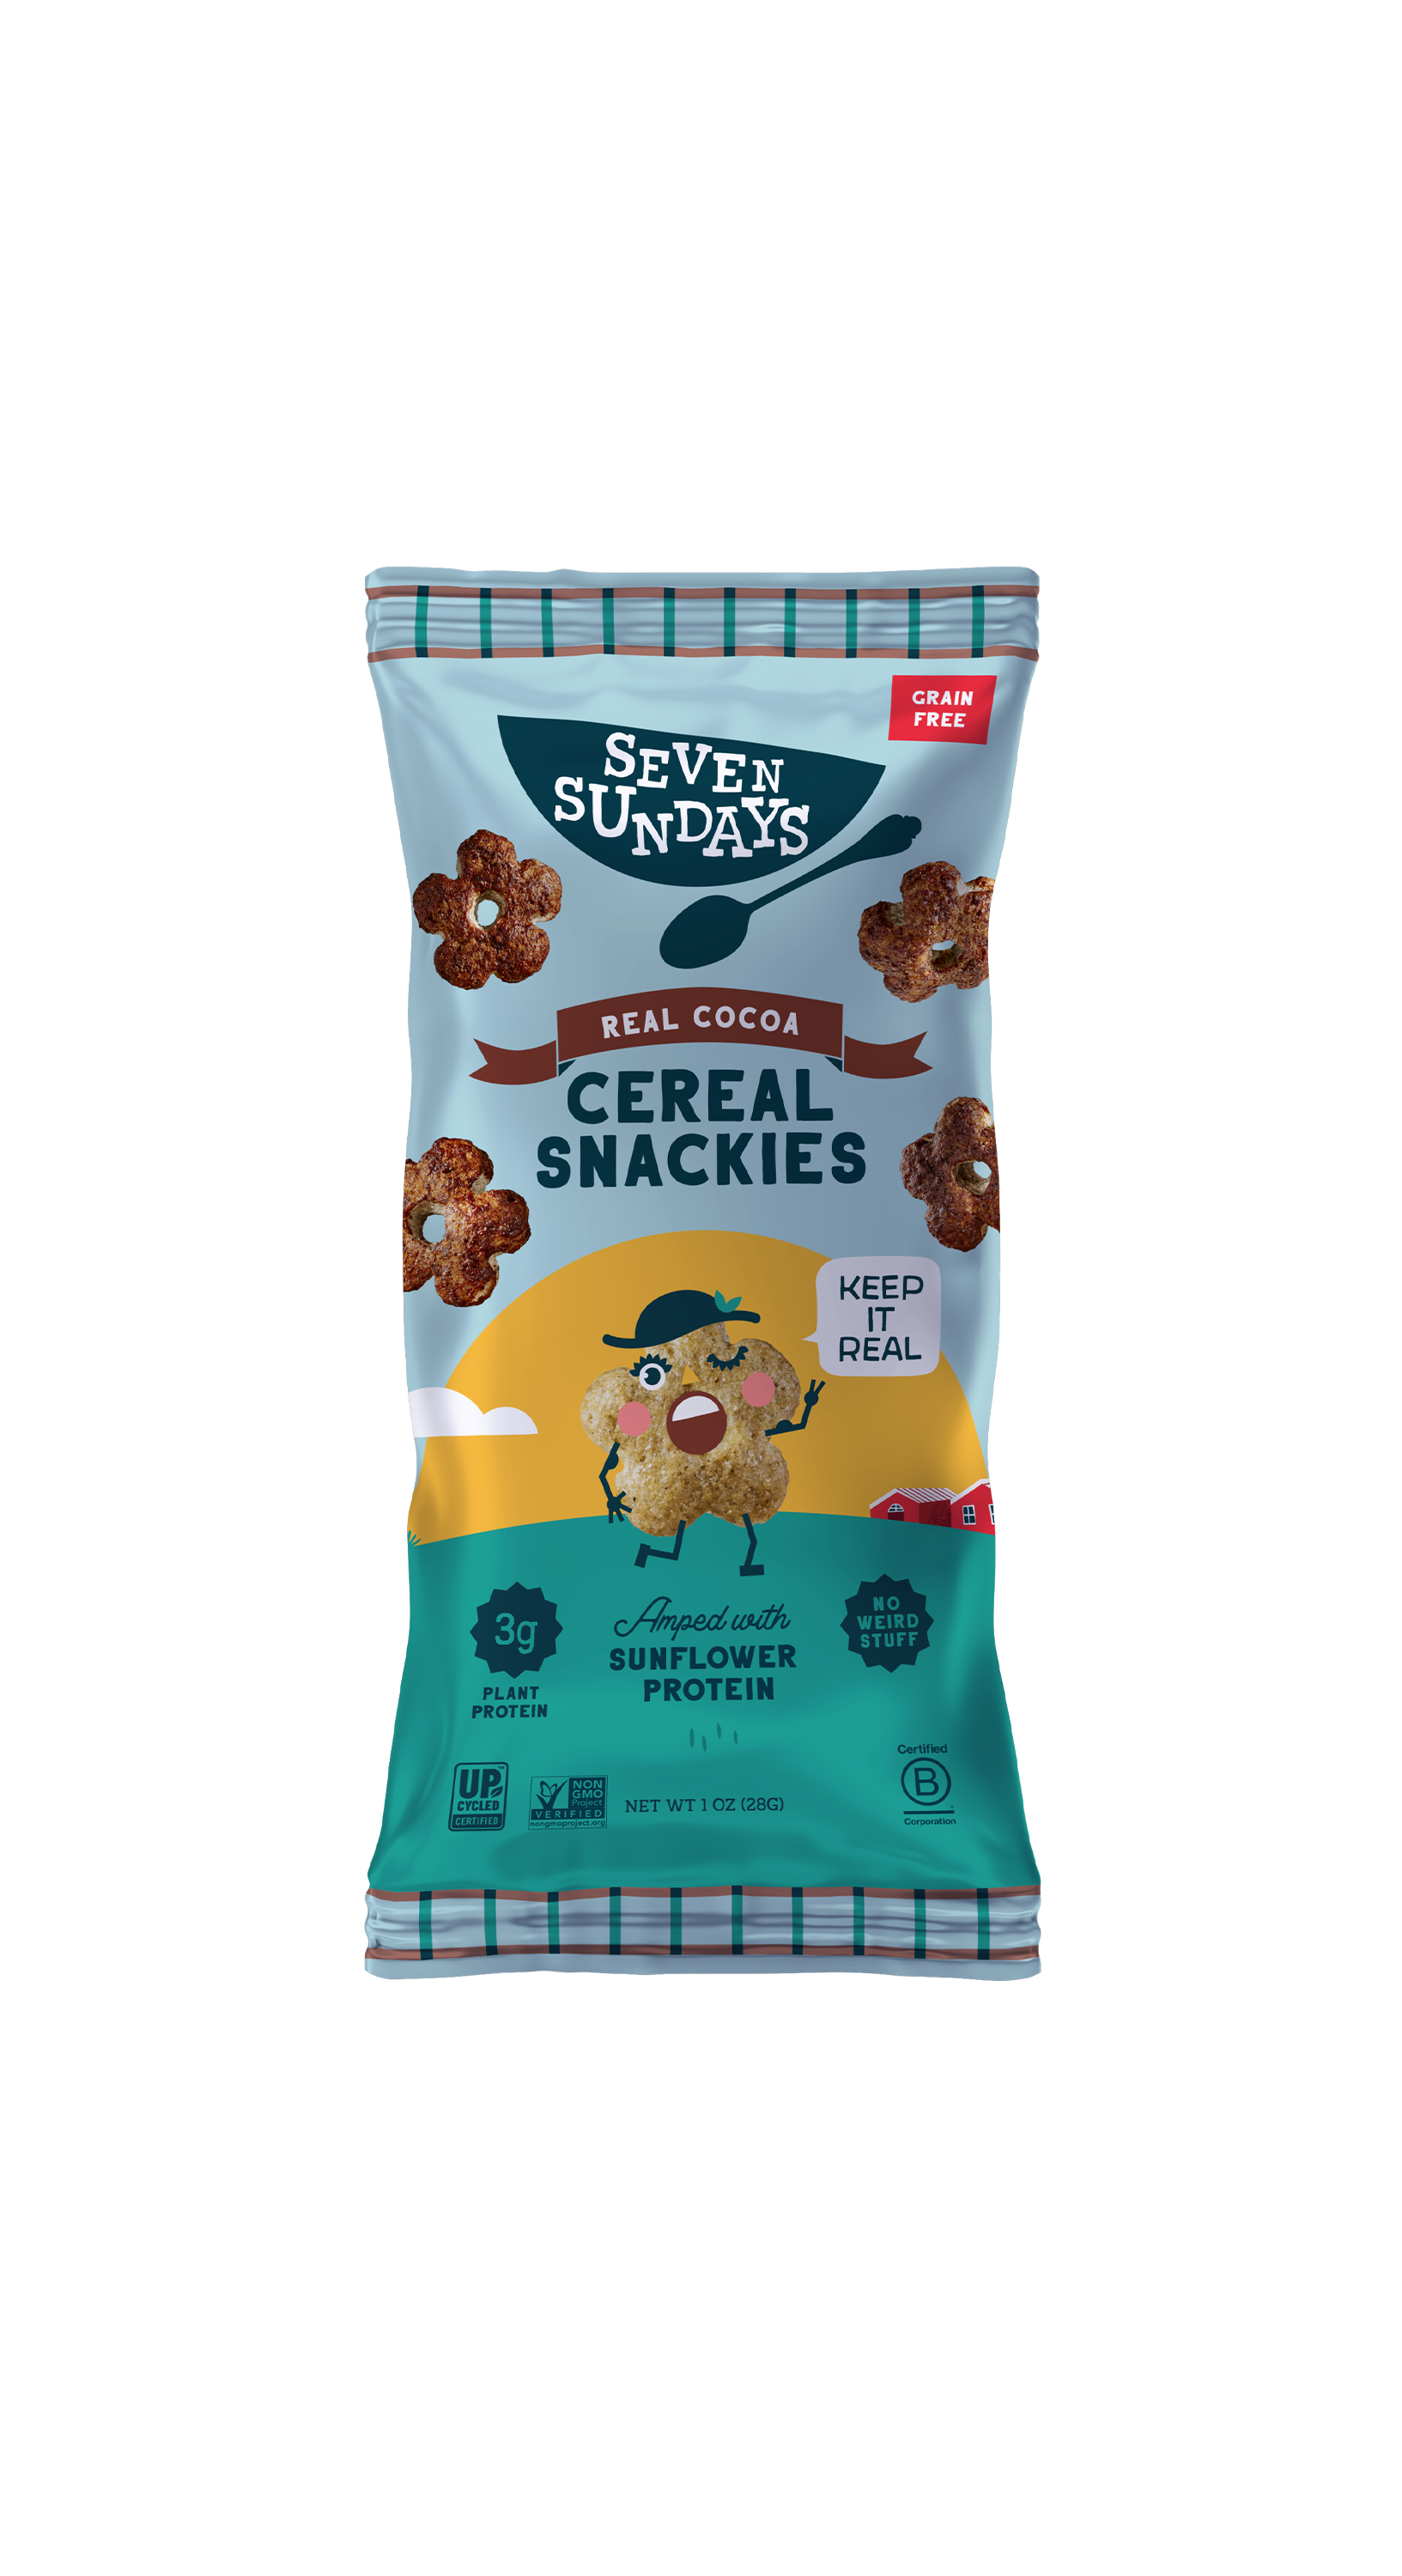 Real Cocoa Sunflower Cereal Snackies